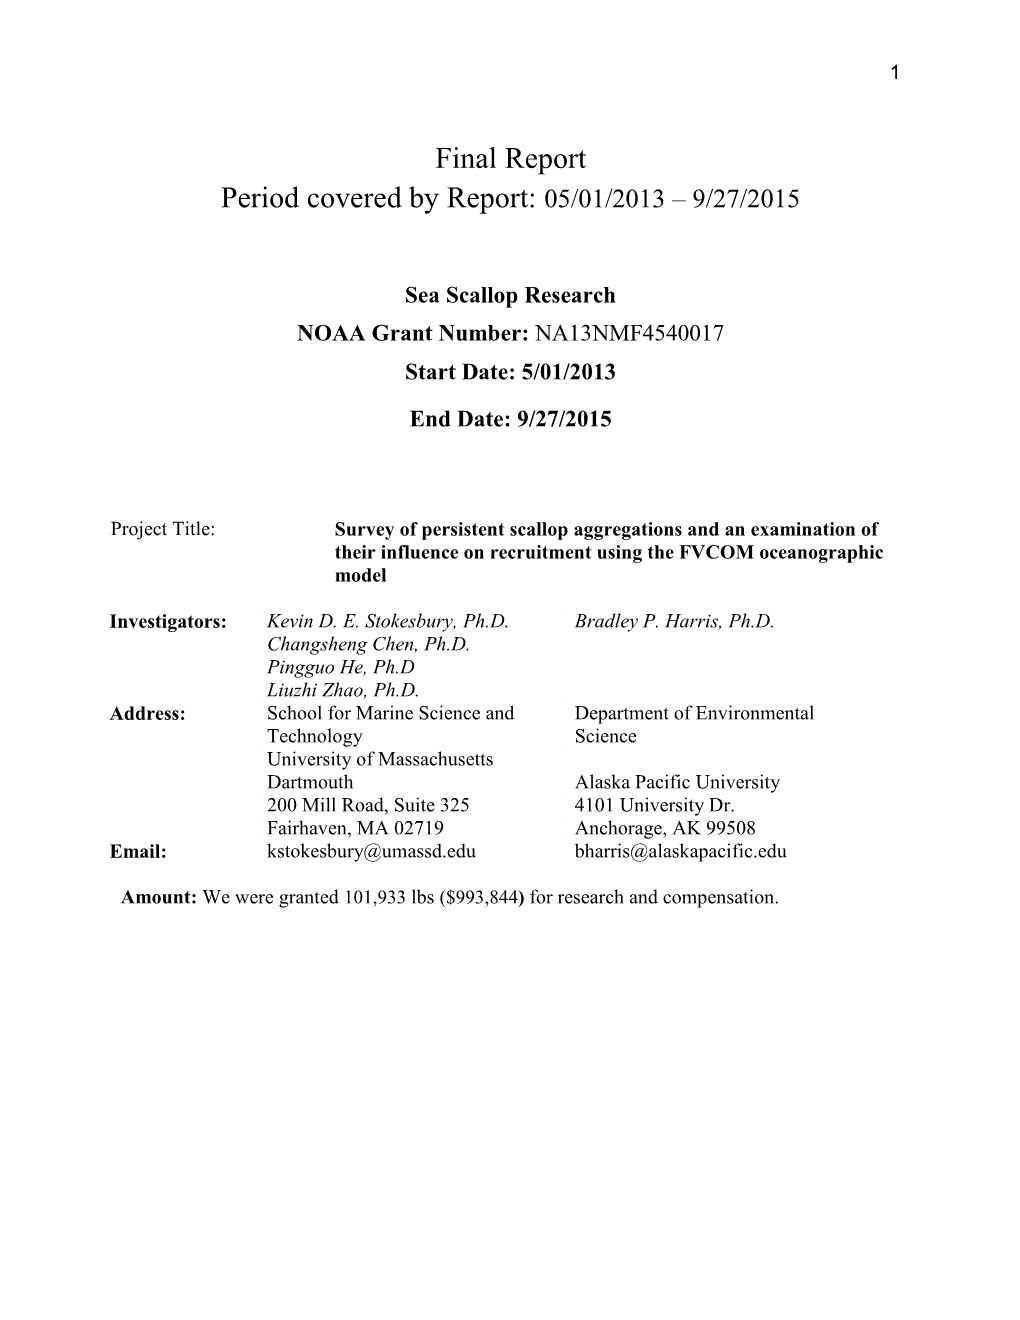 Final Report Period Covered by Report: 05/01/2013 – 9/27/2015